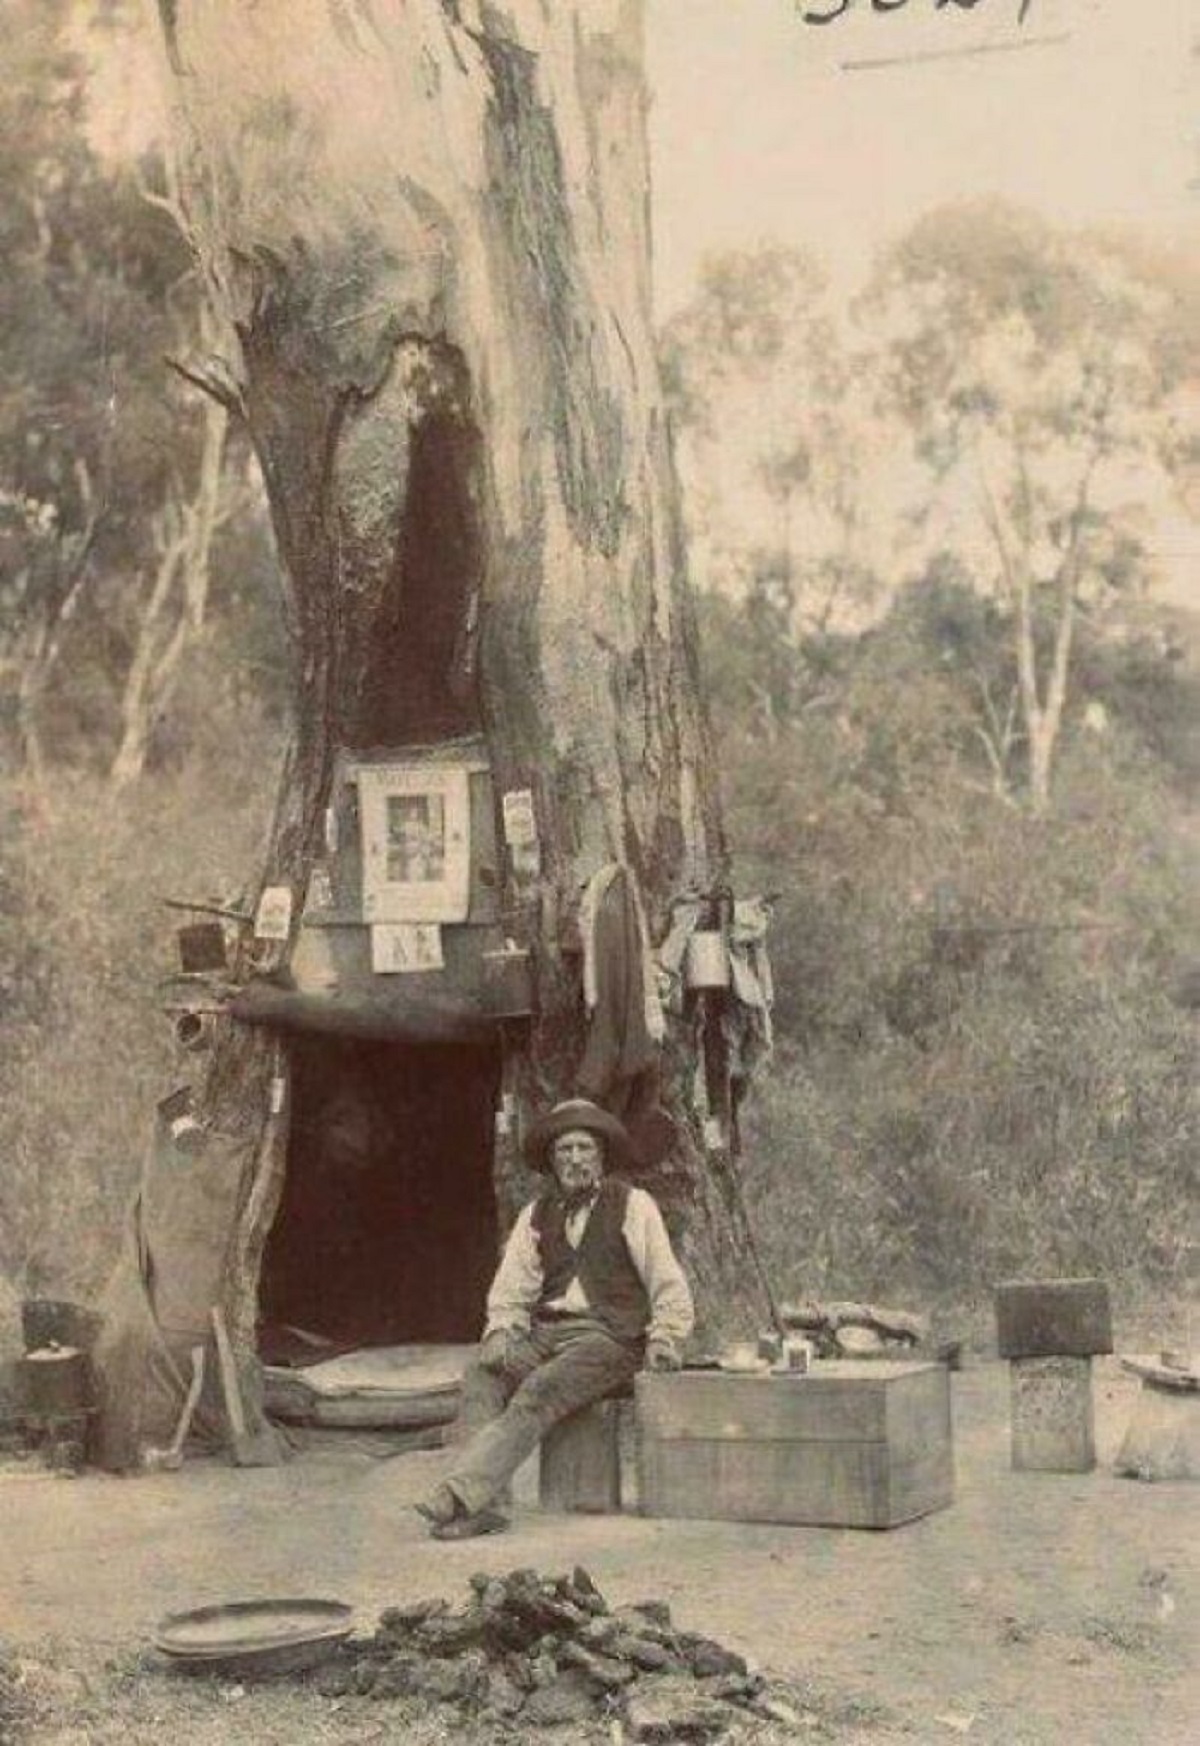 A Swagman Using A Hollowed Gum Tree As A Campsite, 1880. A Swagman Was A Transient Labourer Who Travelled By Foot From Farm To Farm Carrying His Belongings In A Swag (Bedroll). The Term Originated In Australia In The 19th-Century And Was Later Used In New Zealand